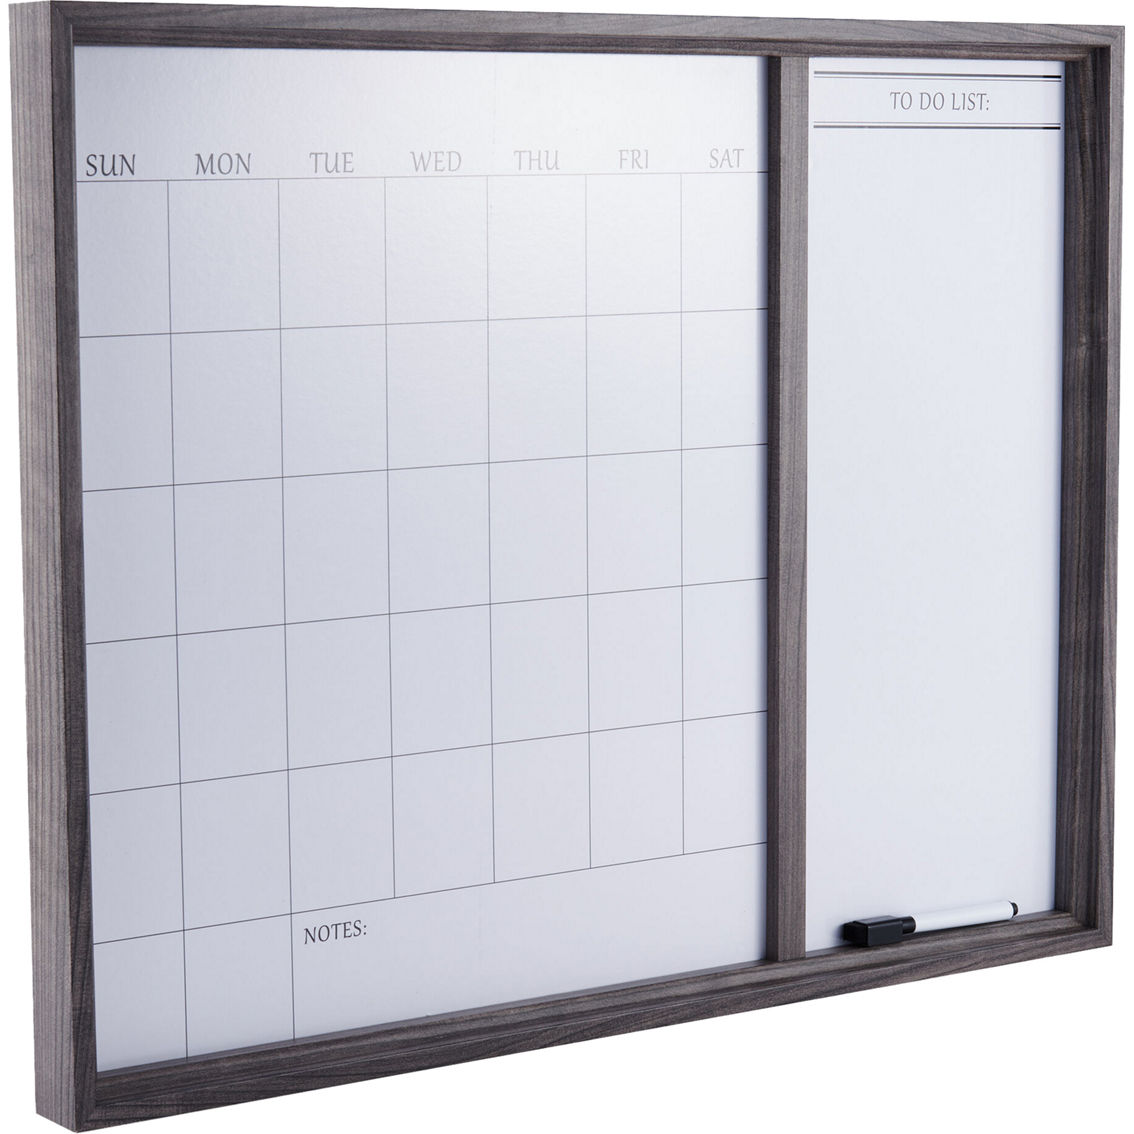 Towle Living 24 x 19 in. Whiteboard Calendar and To-Do Combo - Image 2 of 5